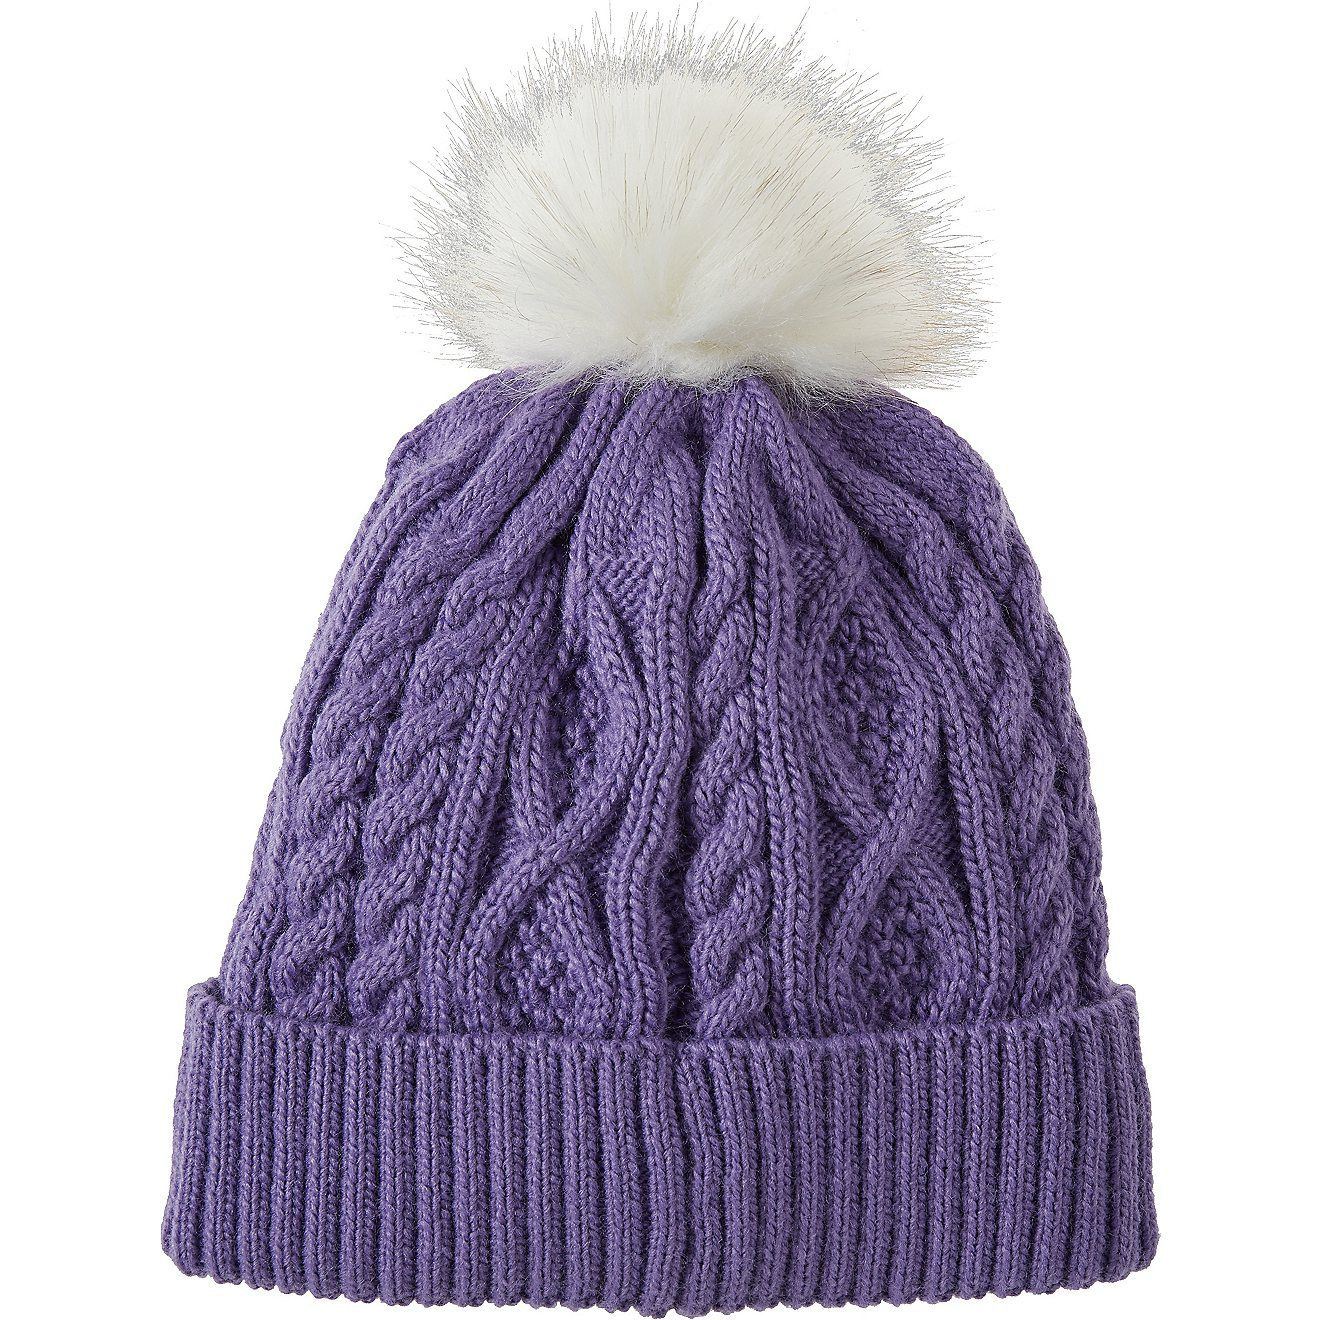 Magellan Outdoors Girls' Cable Knit Beanie | Academy | Academy Sports + Outdoors